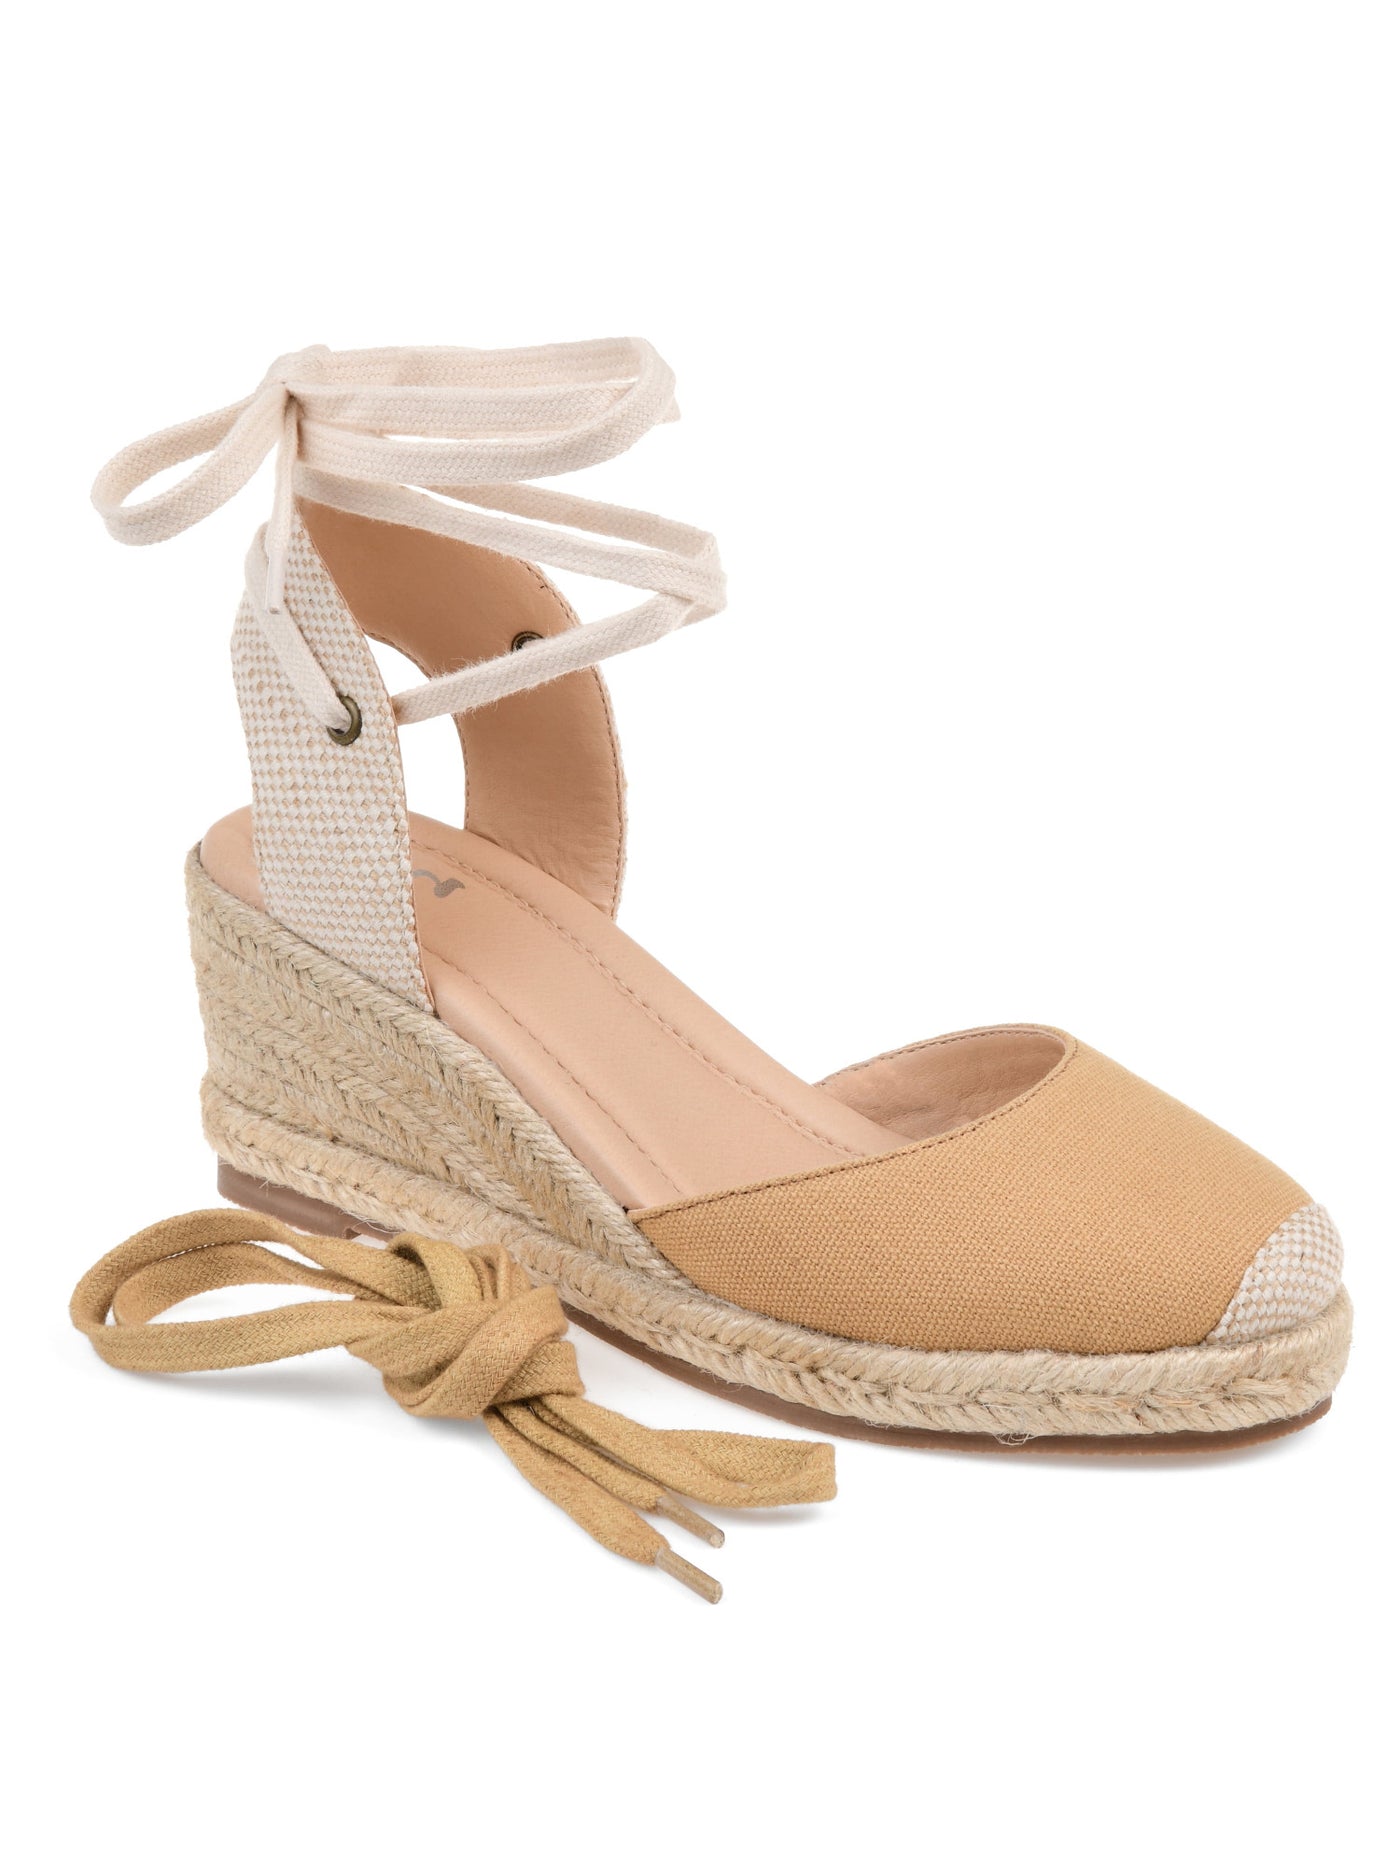 JOURNEE COLLECTION Womens Beige Mixed Media Wrap Up Laces Padded Monte Round Toe Wedge Lace-Up Espadrille Shoes 9 W